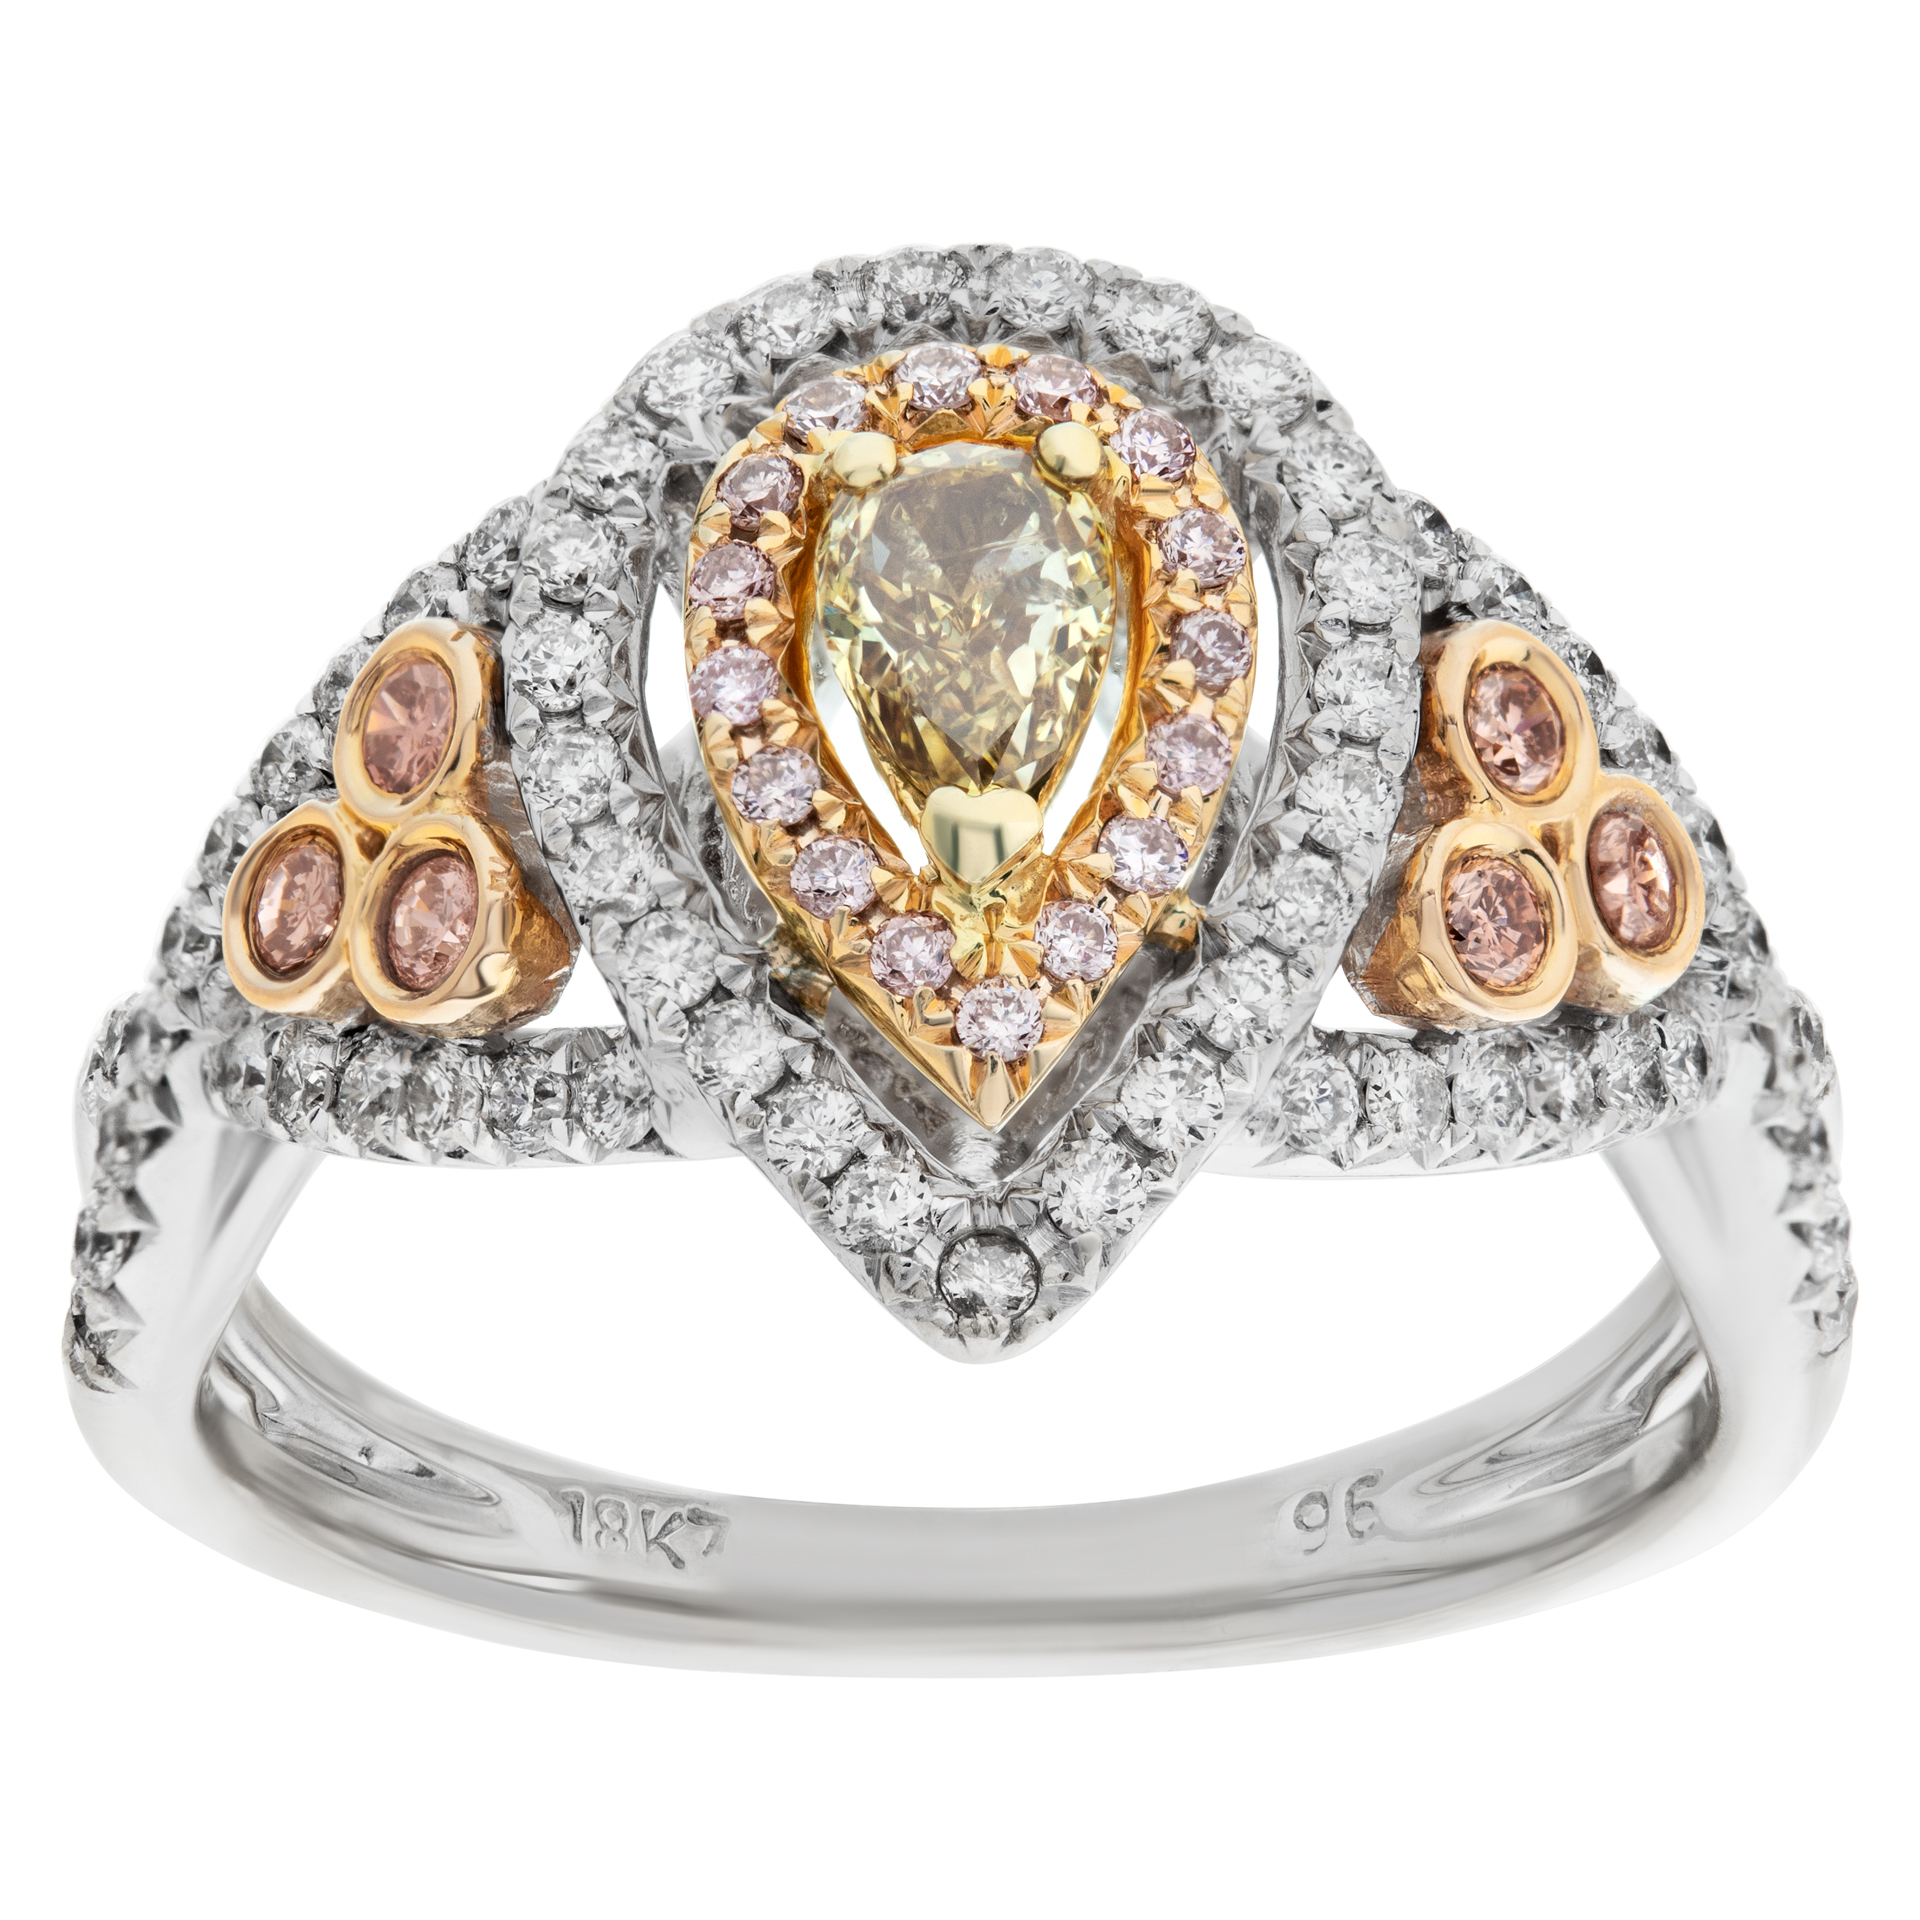 Pear shape center diamond ring with micro pave set in 18k. 2.00 carats. Size 6 1/4 image 1